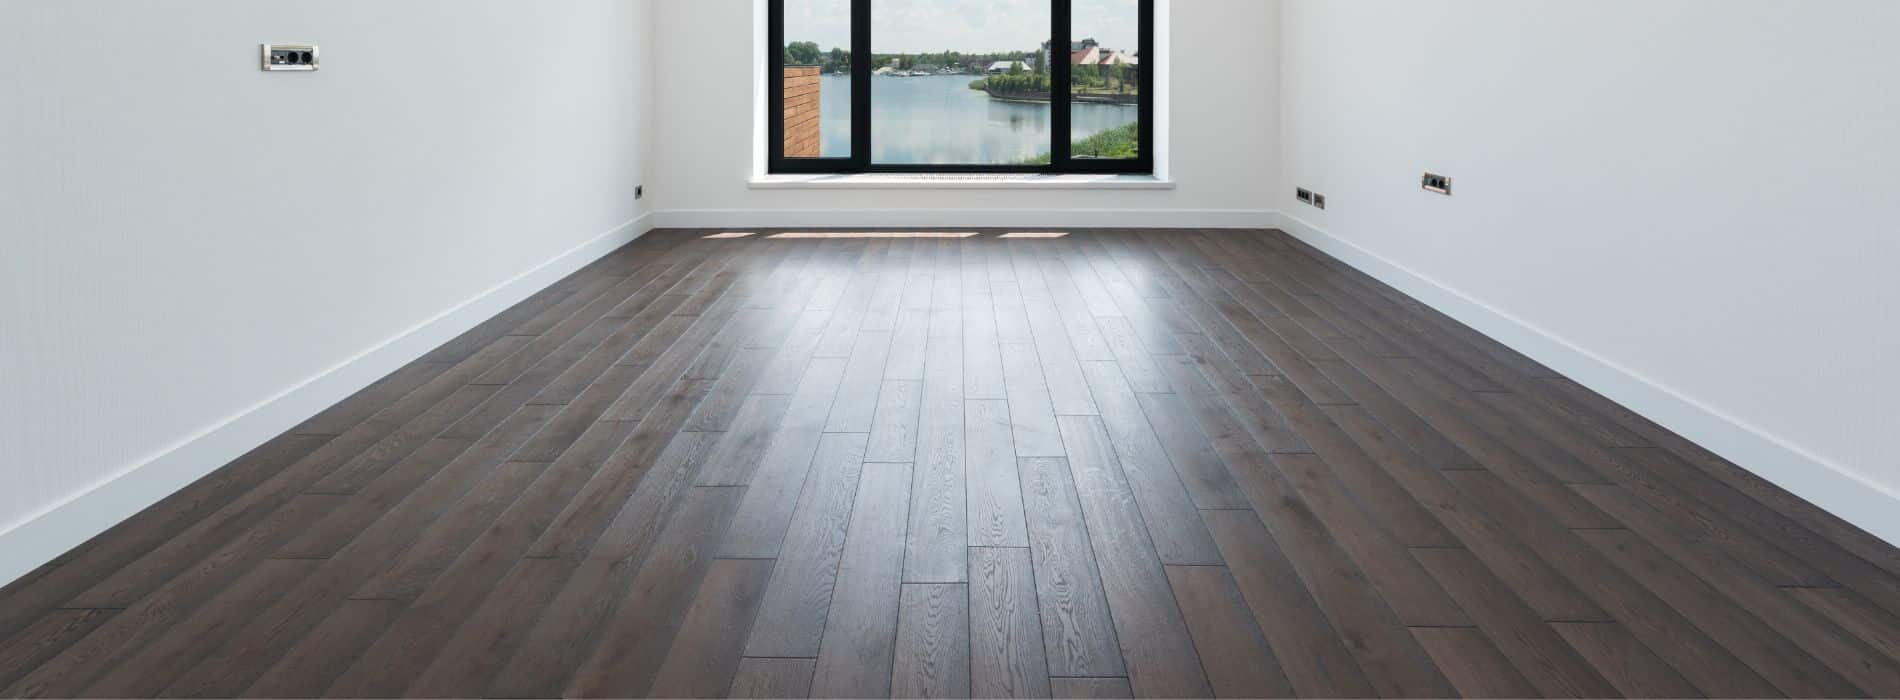 Experience the transformation of an 7-year-old hardwood floor in Barnes, SW13, by Mr Sander®. Bona 2.2K Frost whitewashing and 12% Traffic HD matte lacquer create a durable, low sheen finish. Embrace timeless elegance with our exceptional floor restoration services.